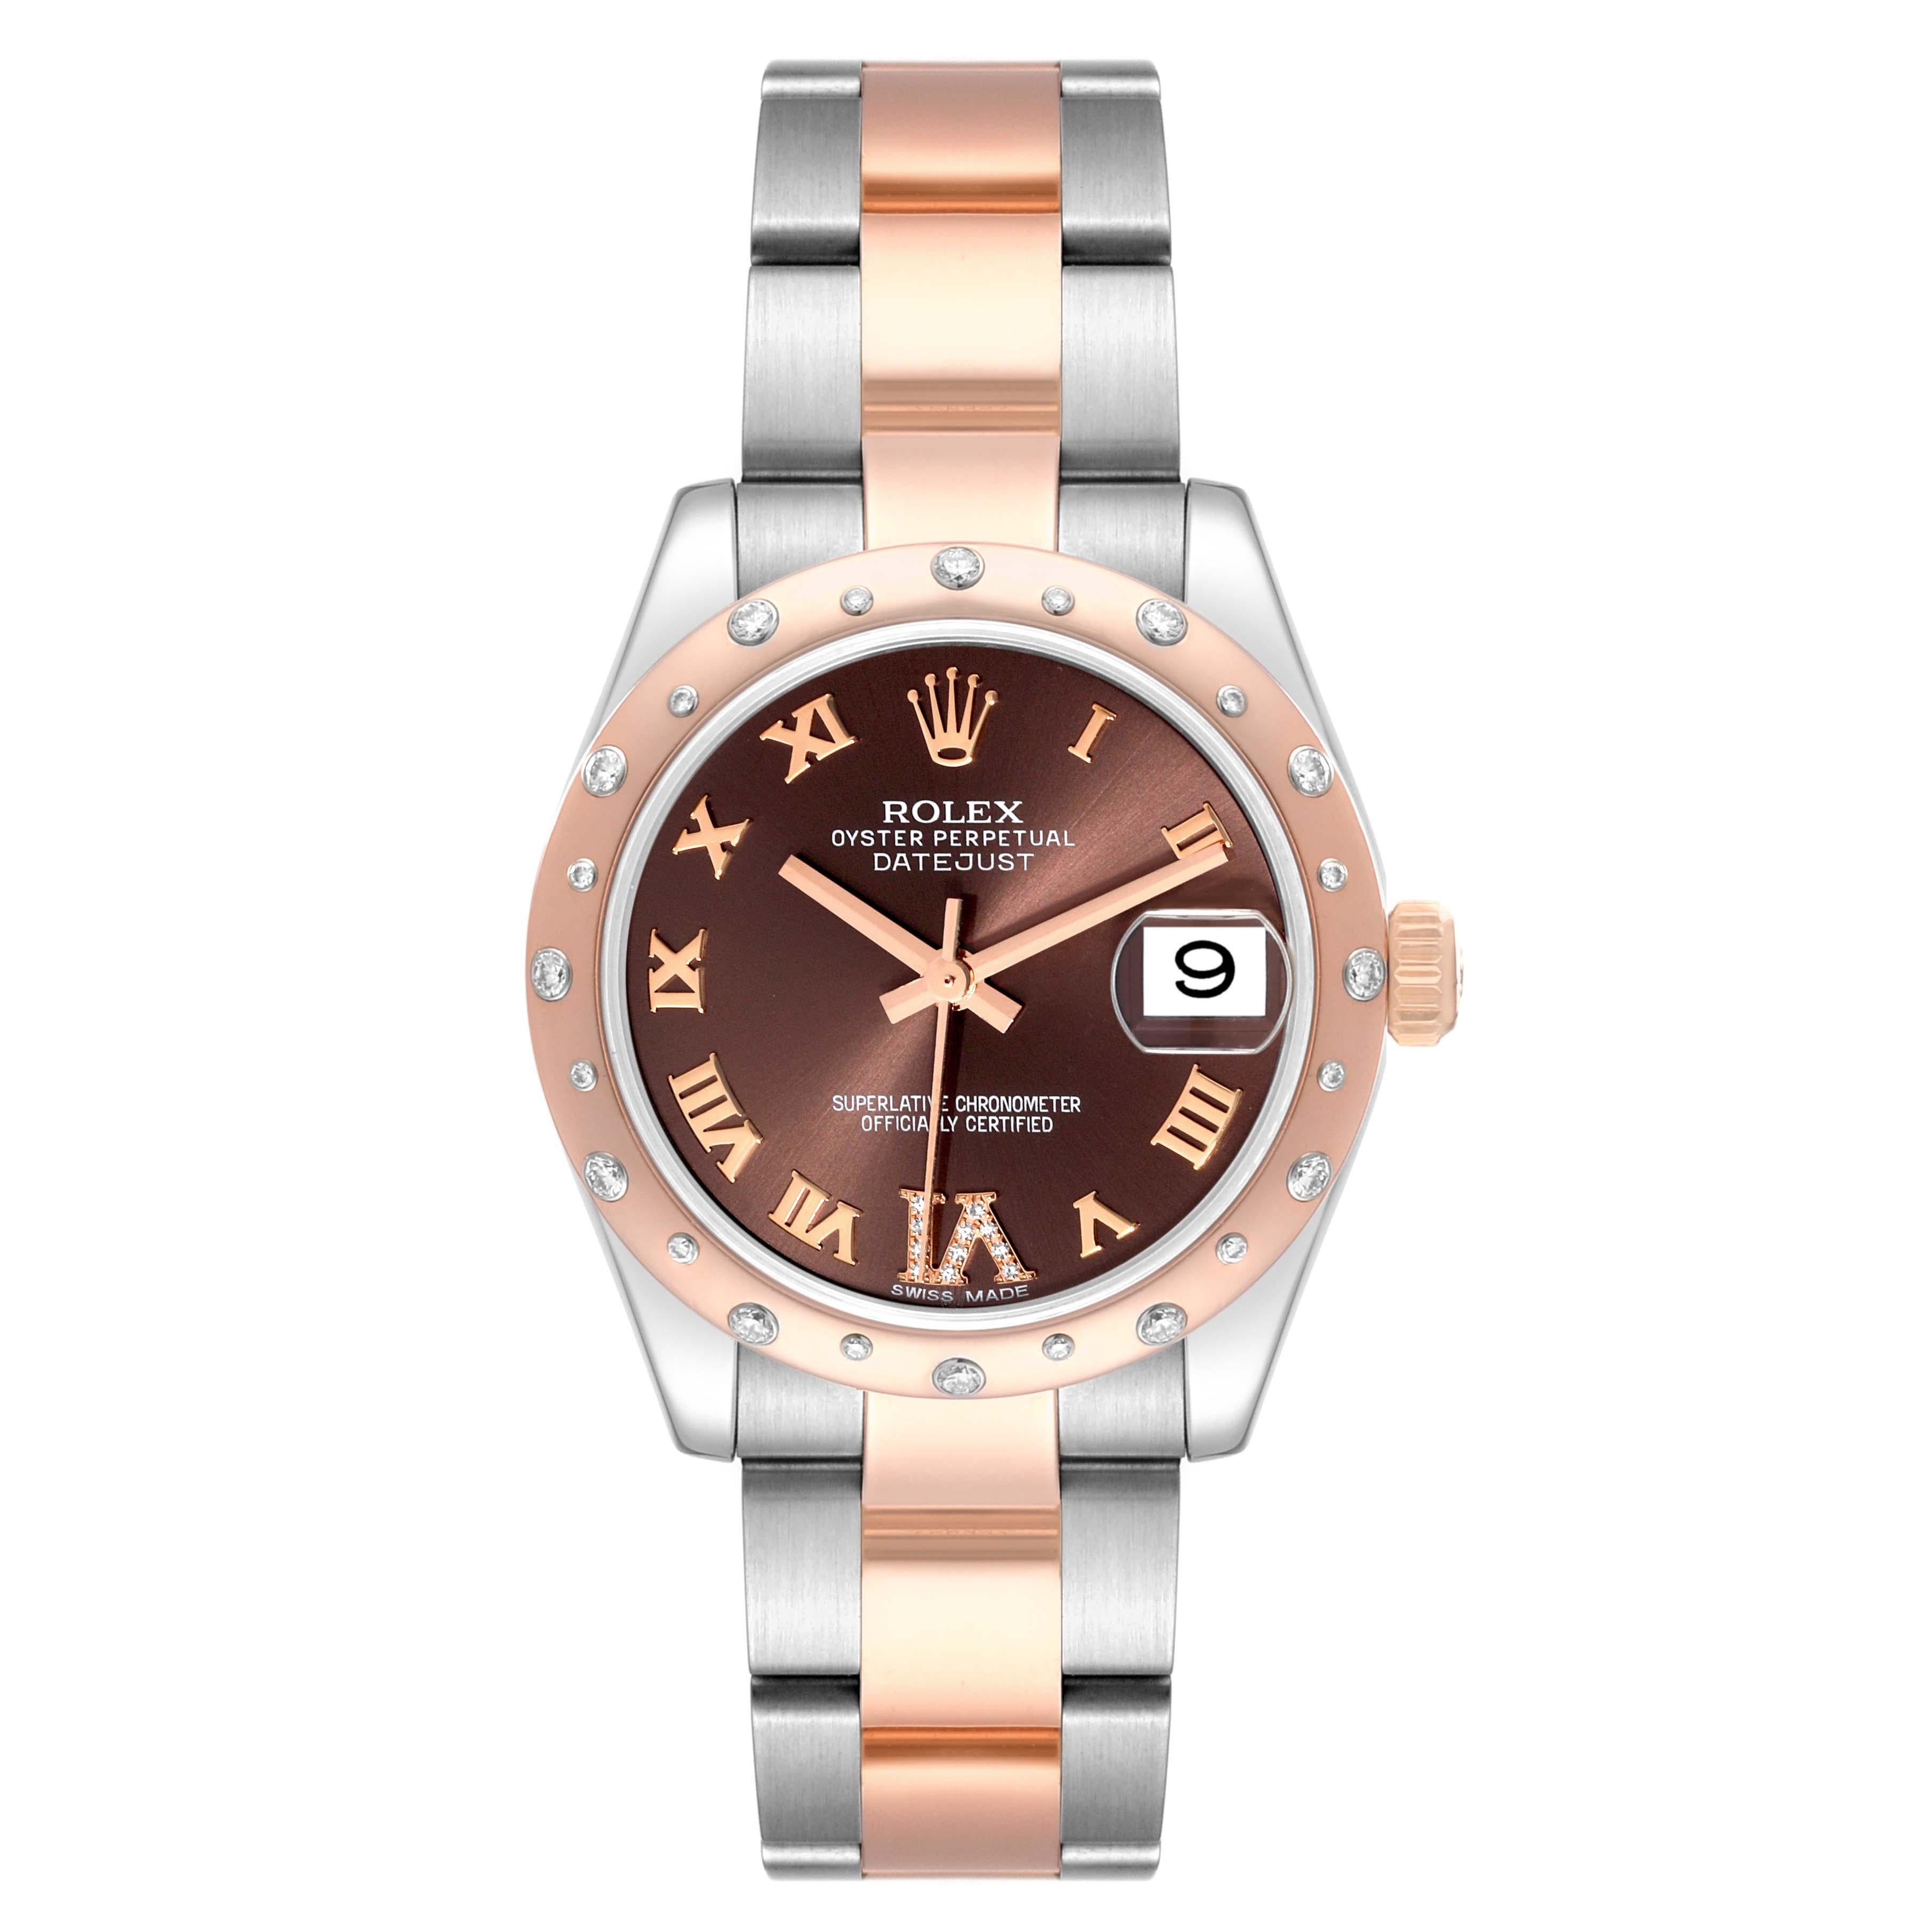 Rolex Datejust Midsize Steel Rose Gold Diamond Ladies Watch 178341 Box Card. Officially certified chronometer self-winding movement with quickset date function. Stainless steel and 18K rose gold oyster case 31 mm in diameter. Rolex logo on a crown.